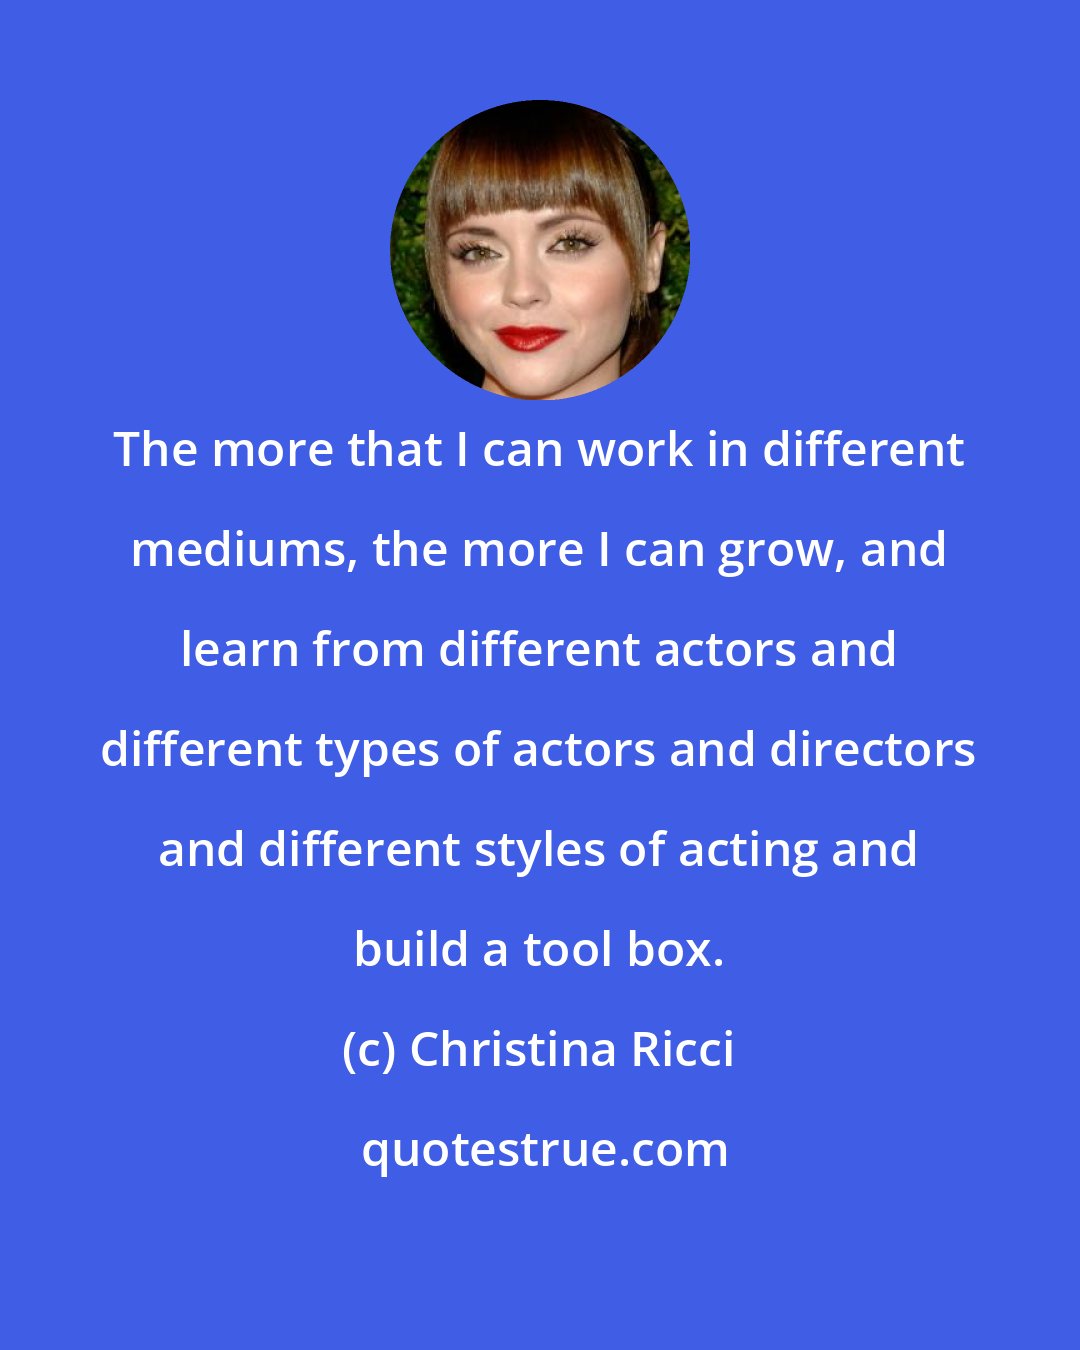 Christina Ricci: The more that I can work in different mediums, the more I can grow, and learn from different actors and different types of actors and directors and different styles of acting and build a tool box.